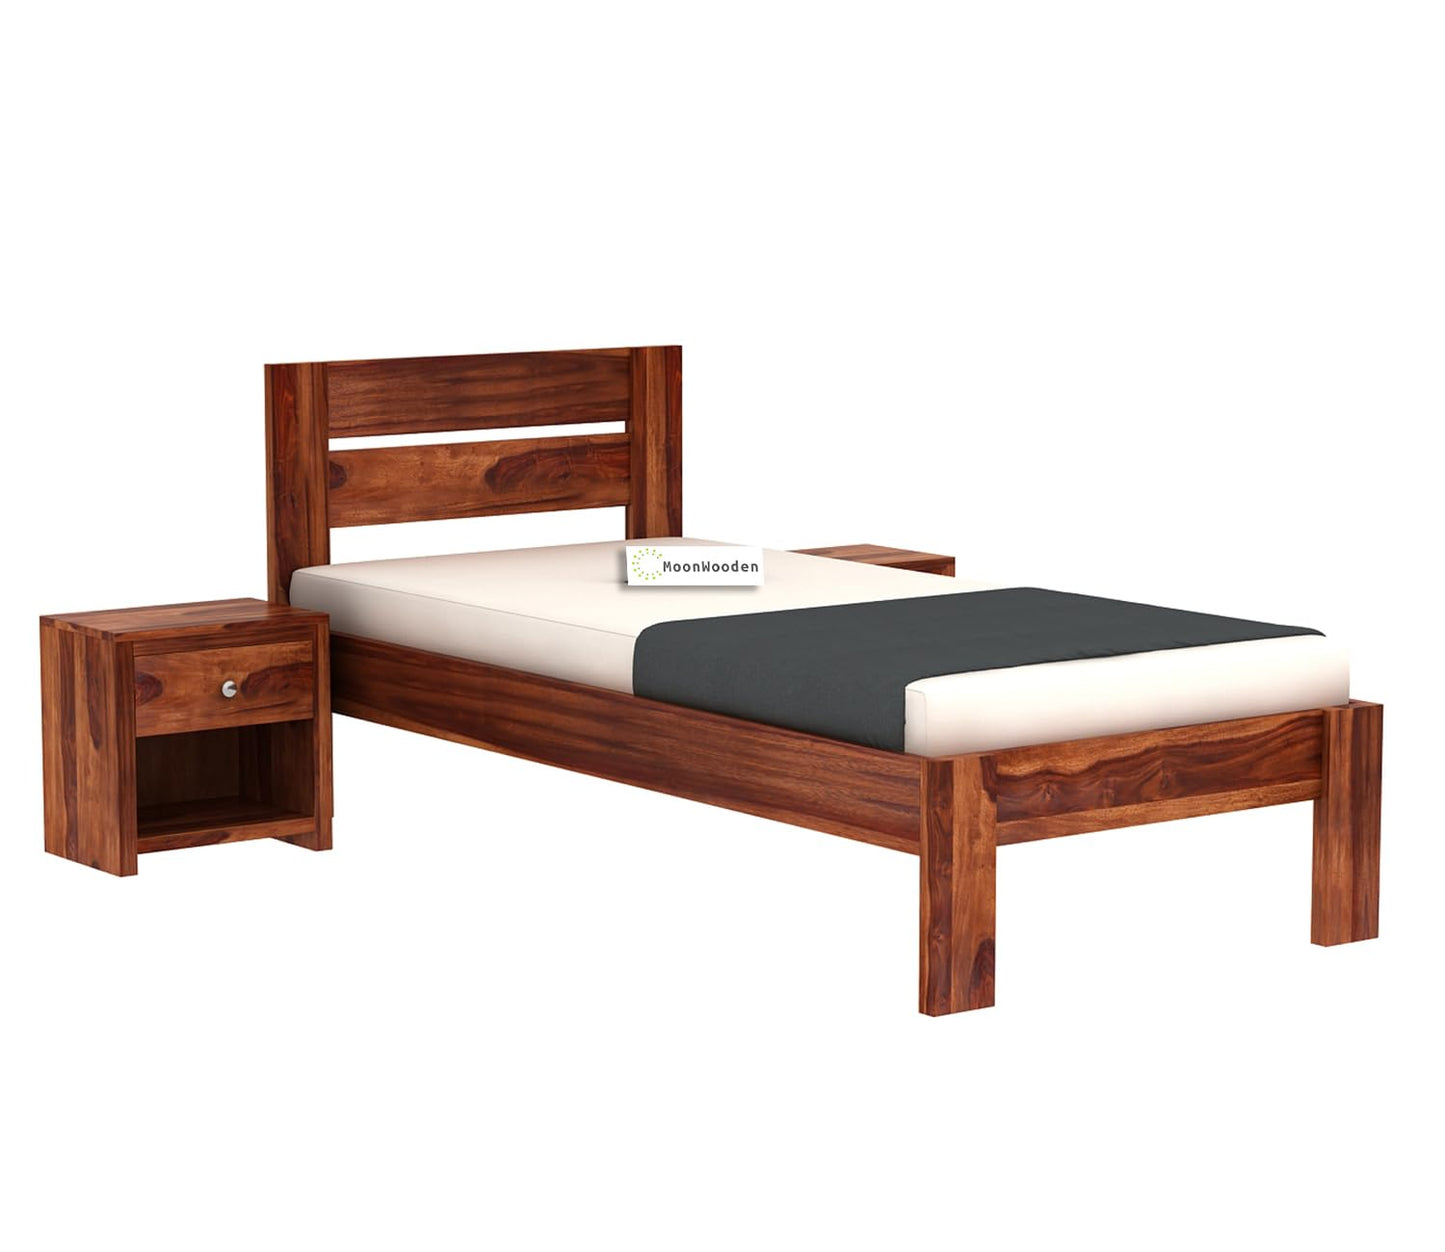 MoonWooden Sheesham Wood Single Size Bed Without Storage for Bedroom Living Room Home Wooden Palang for Hotel (Brown Finish)